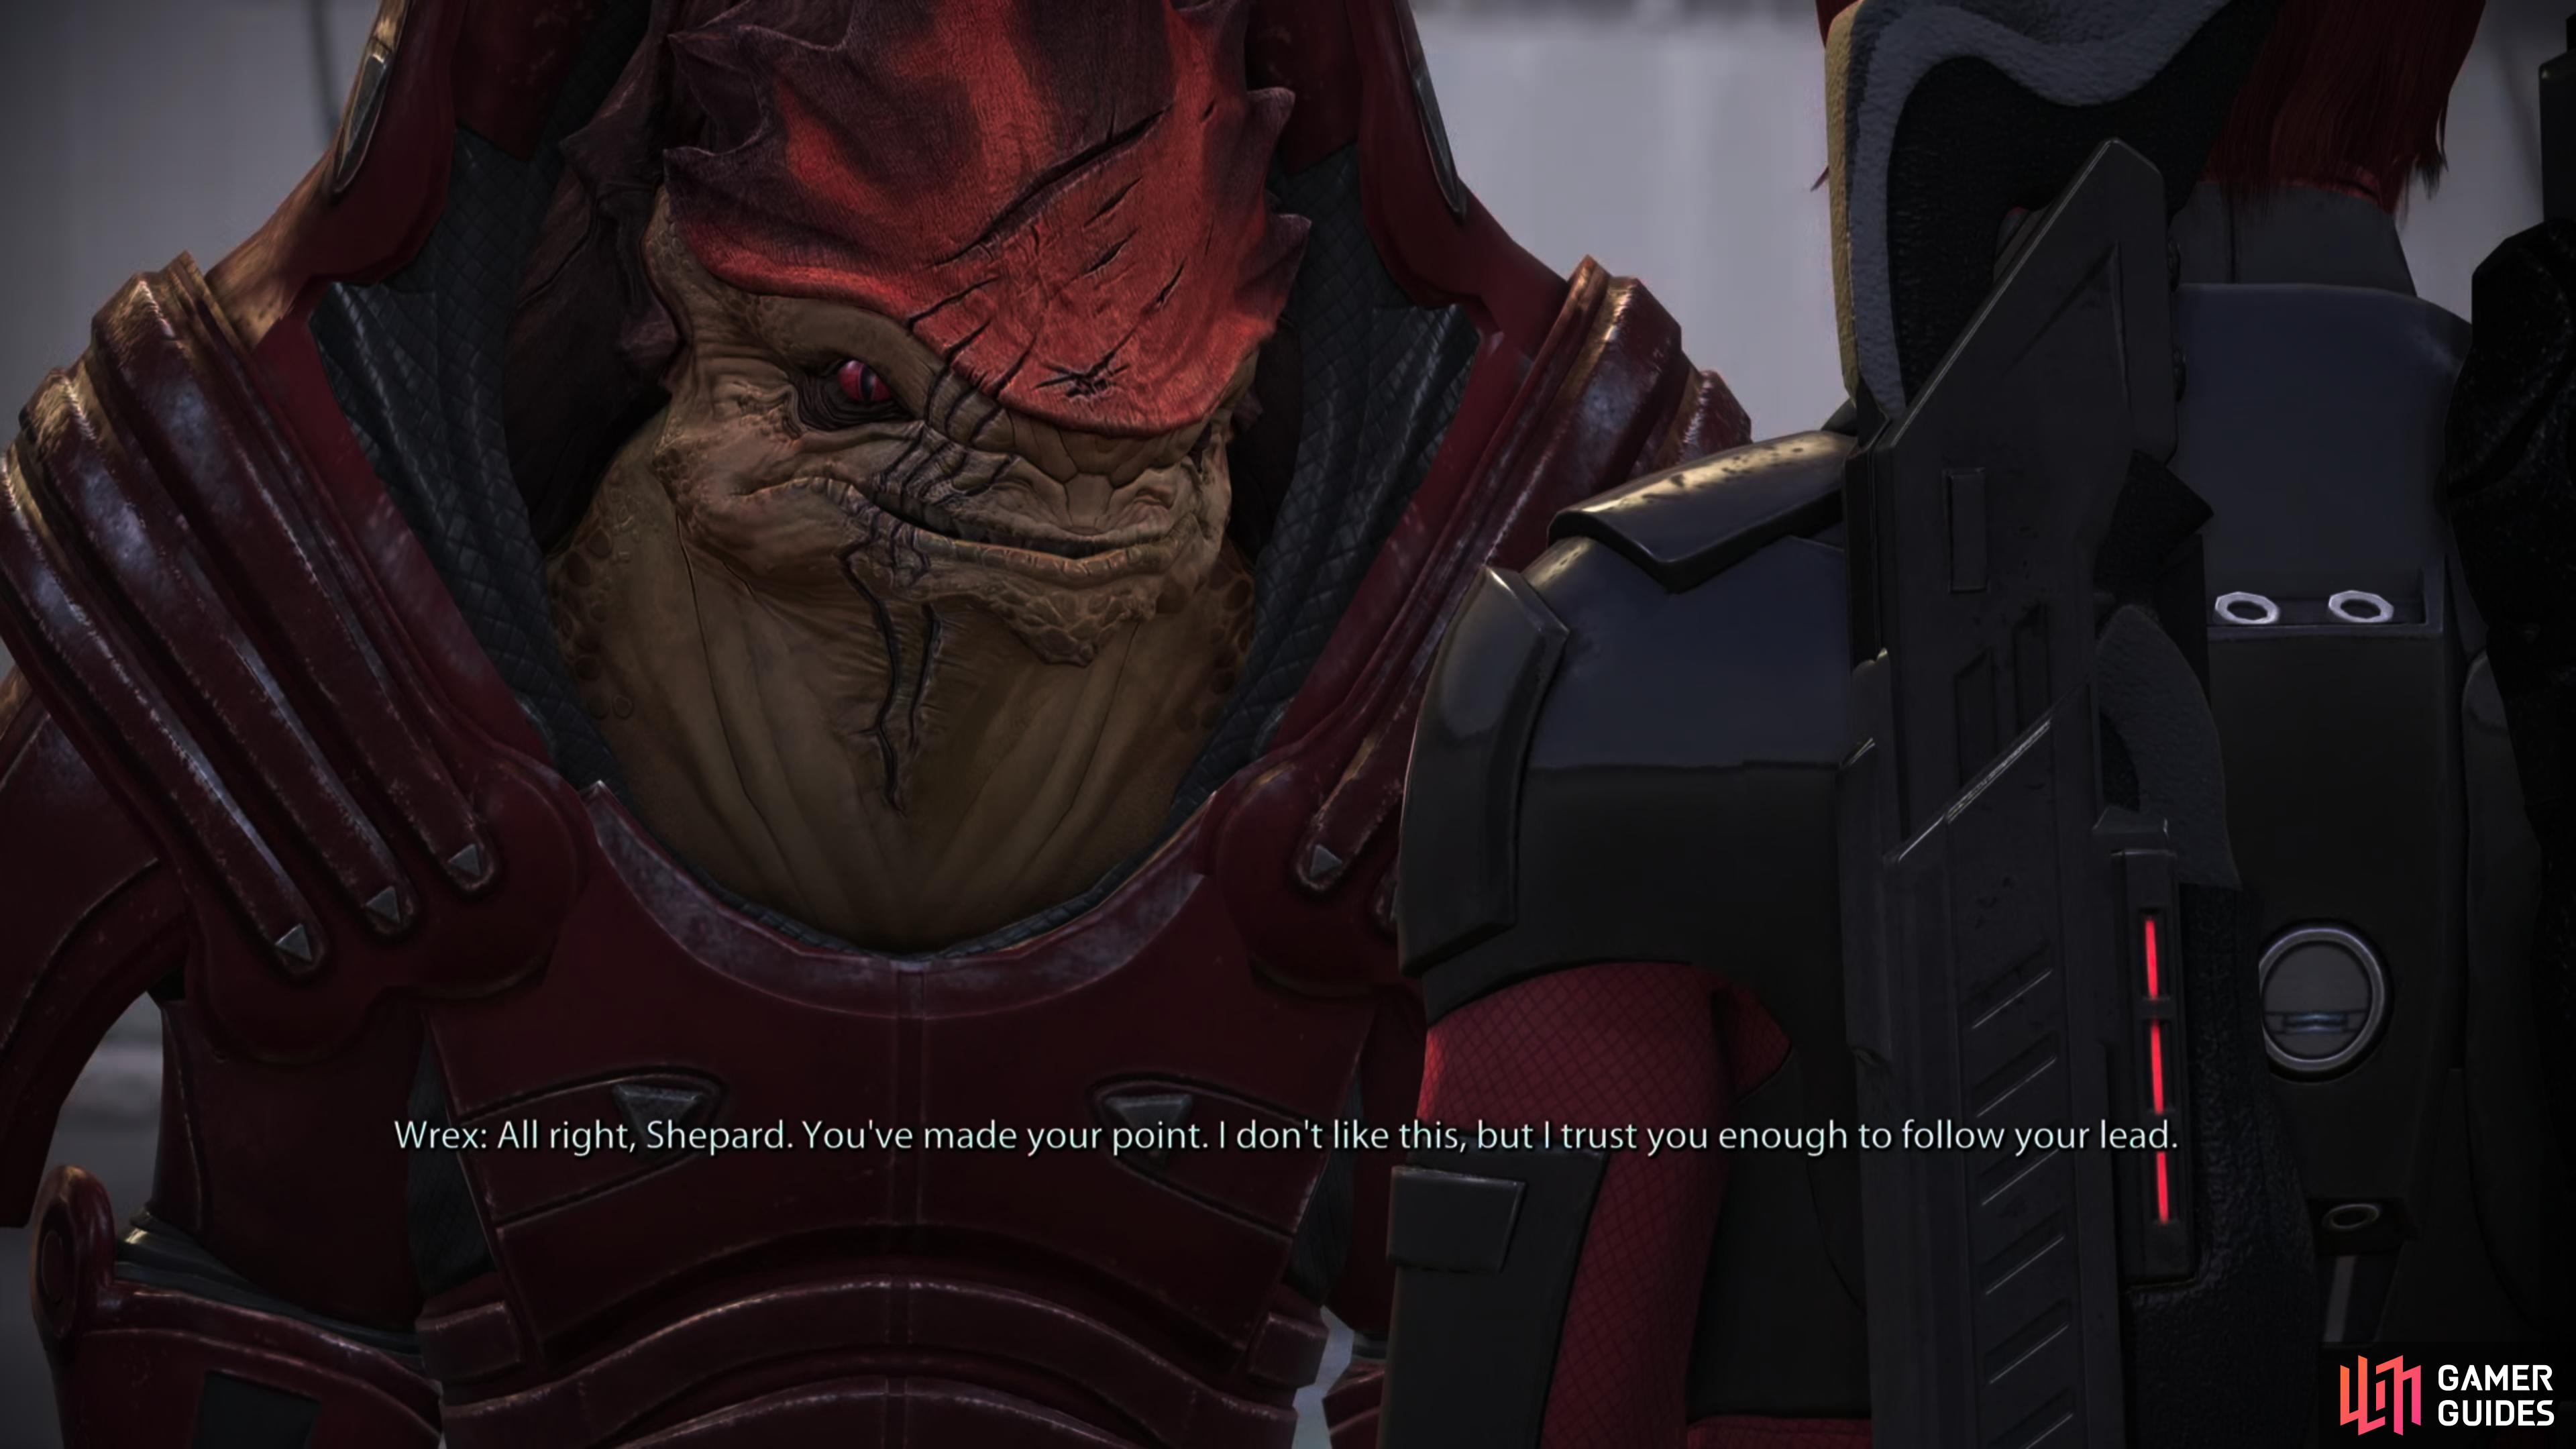 If you completed the assignment Wrex: Family Armor and stick to Paragon options - or if you select a Charm/intimidate dialog option - you can convince Wrex to stand down.